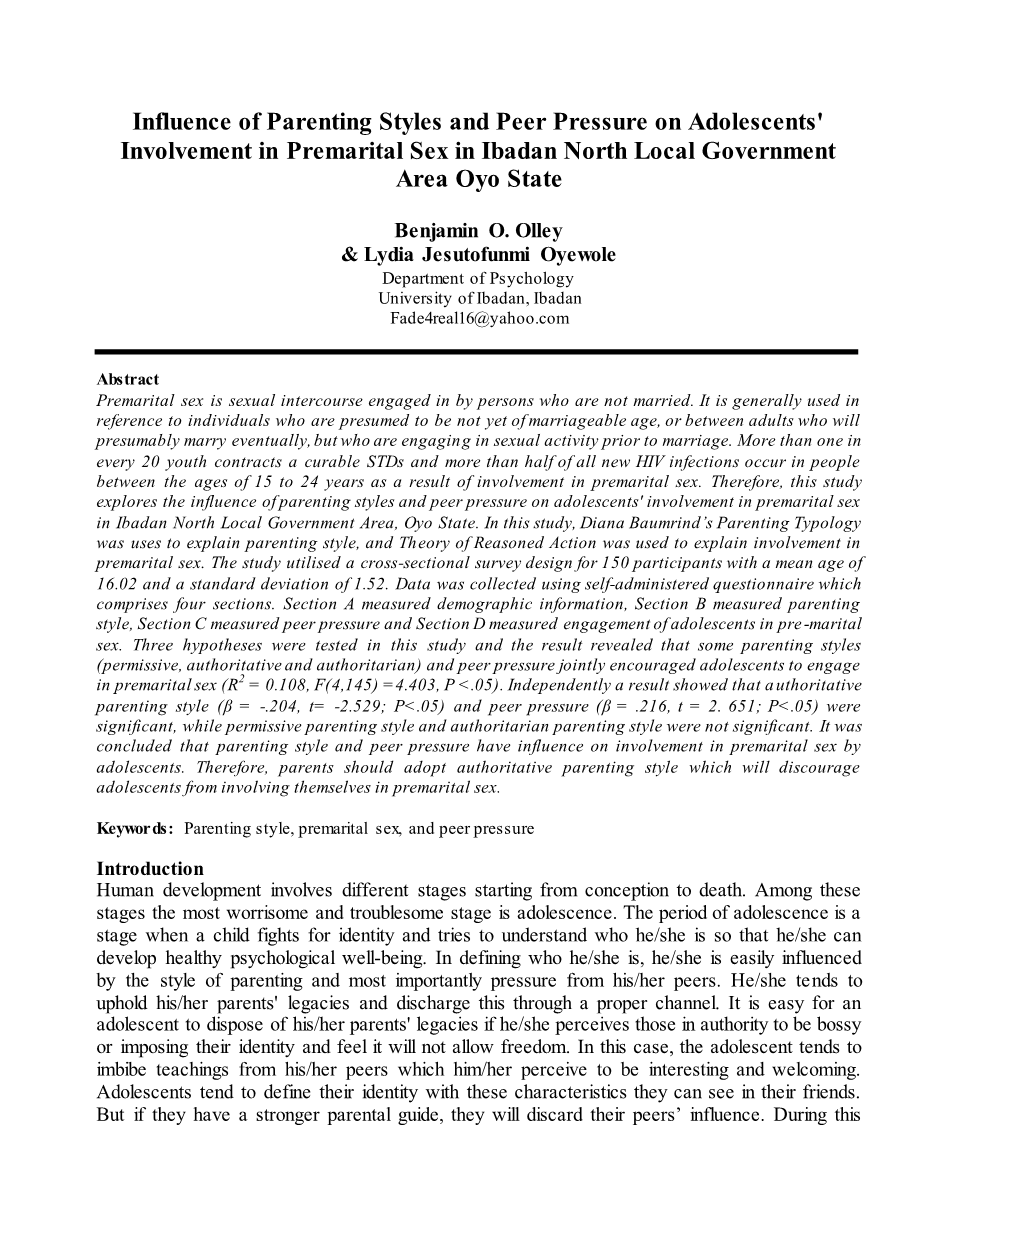 Influence of Parenting Styles and Peer Pressure on Adolescents' Involvement in Premarital Sex in Ibadan North Local Government Area Oyo State